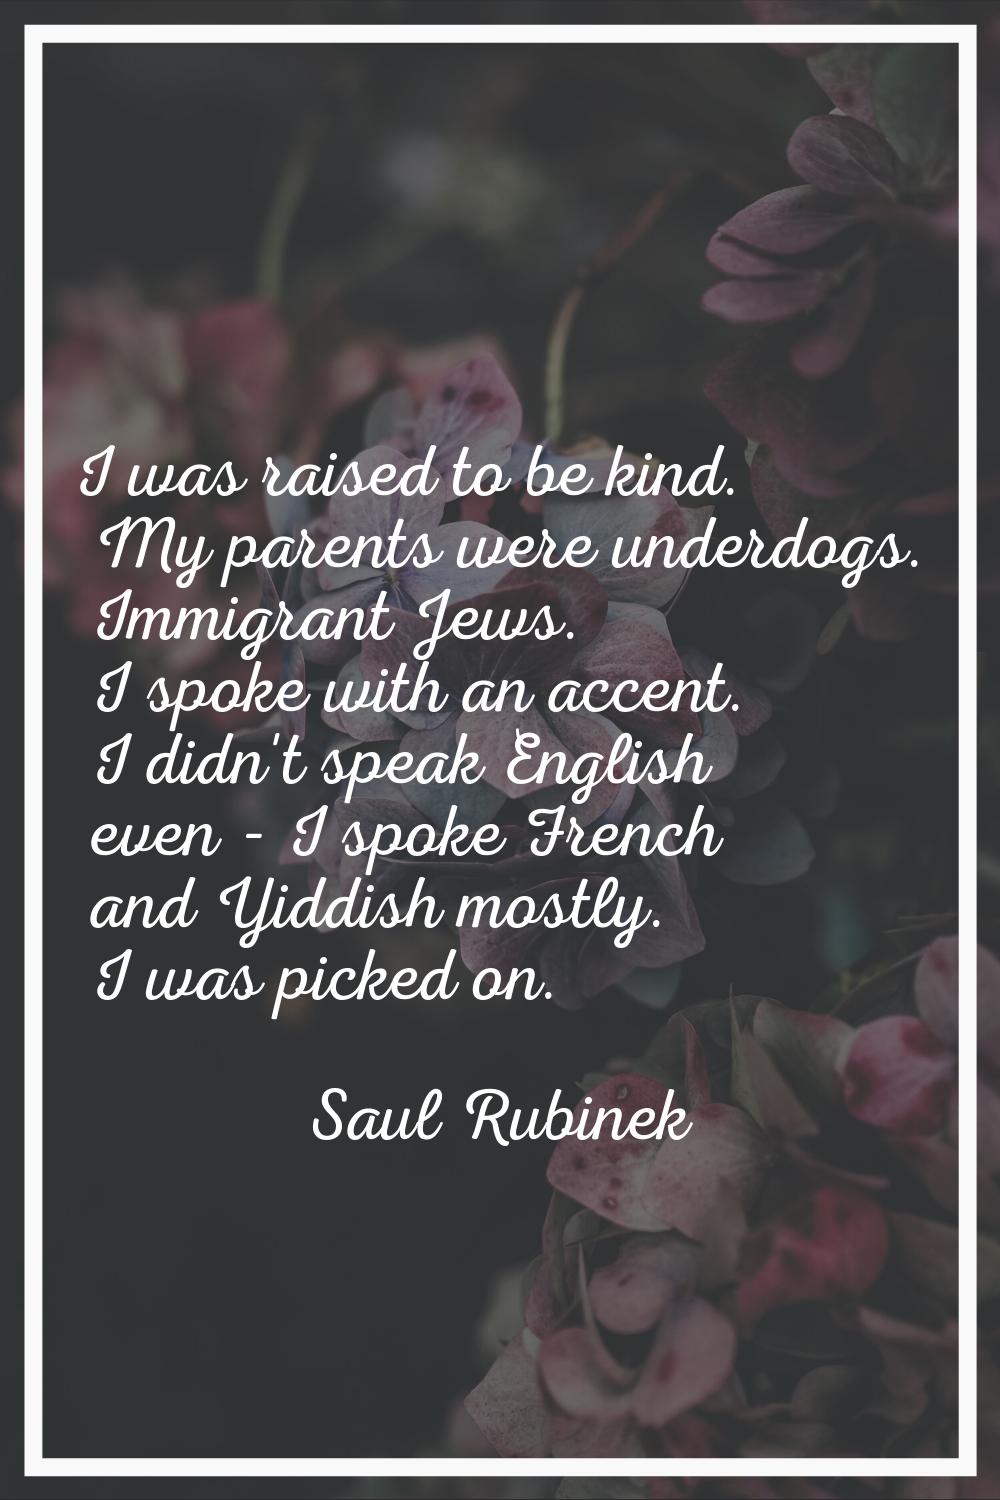 I was raised to be kind. My parents were underdogs. Immigrant Jews. I spoke with an accent. I didn'